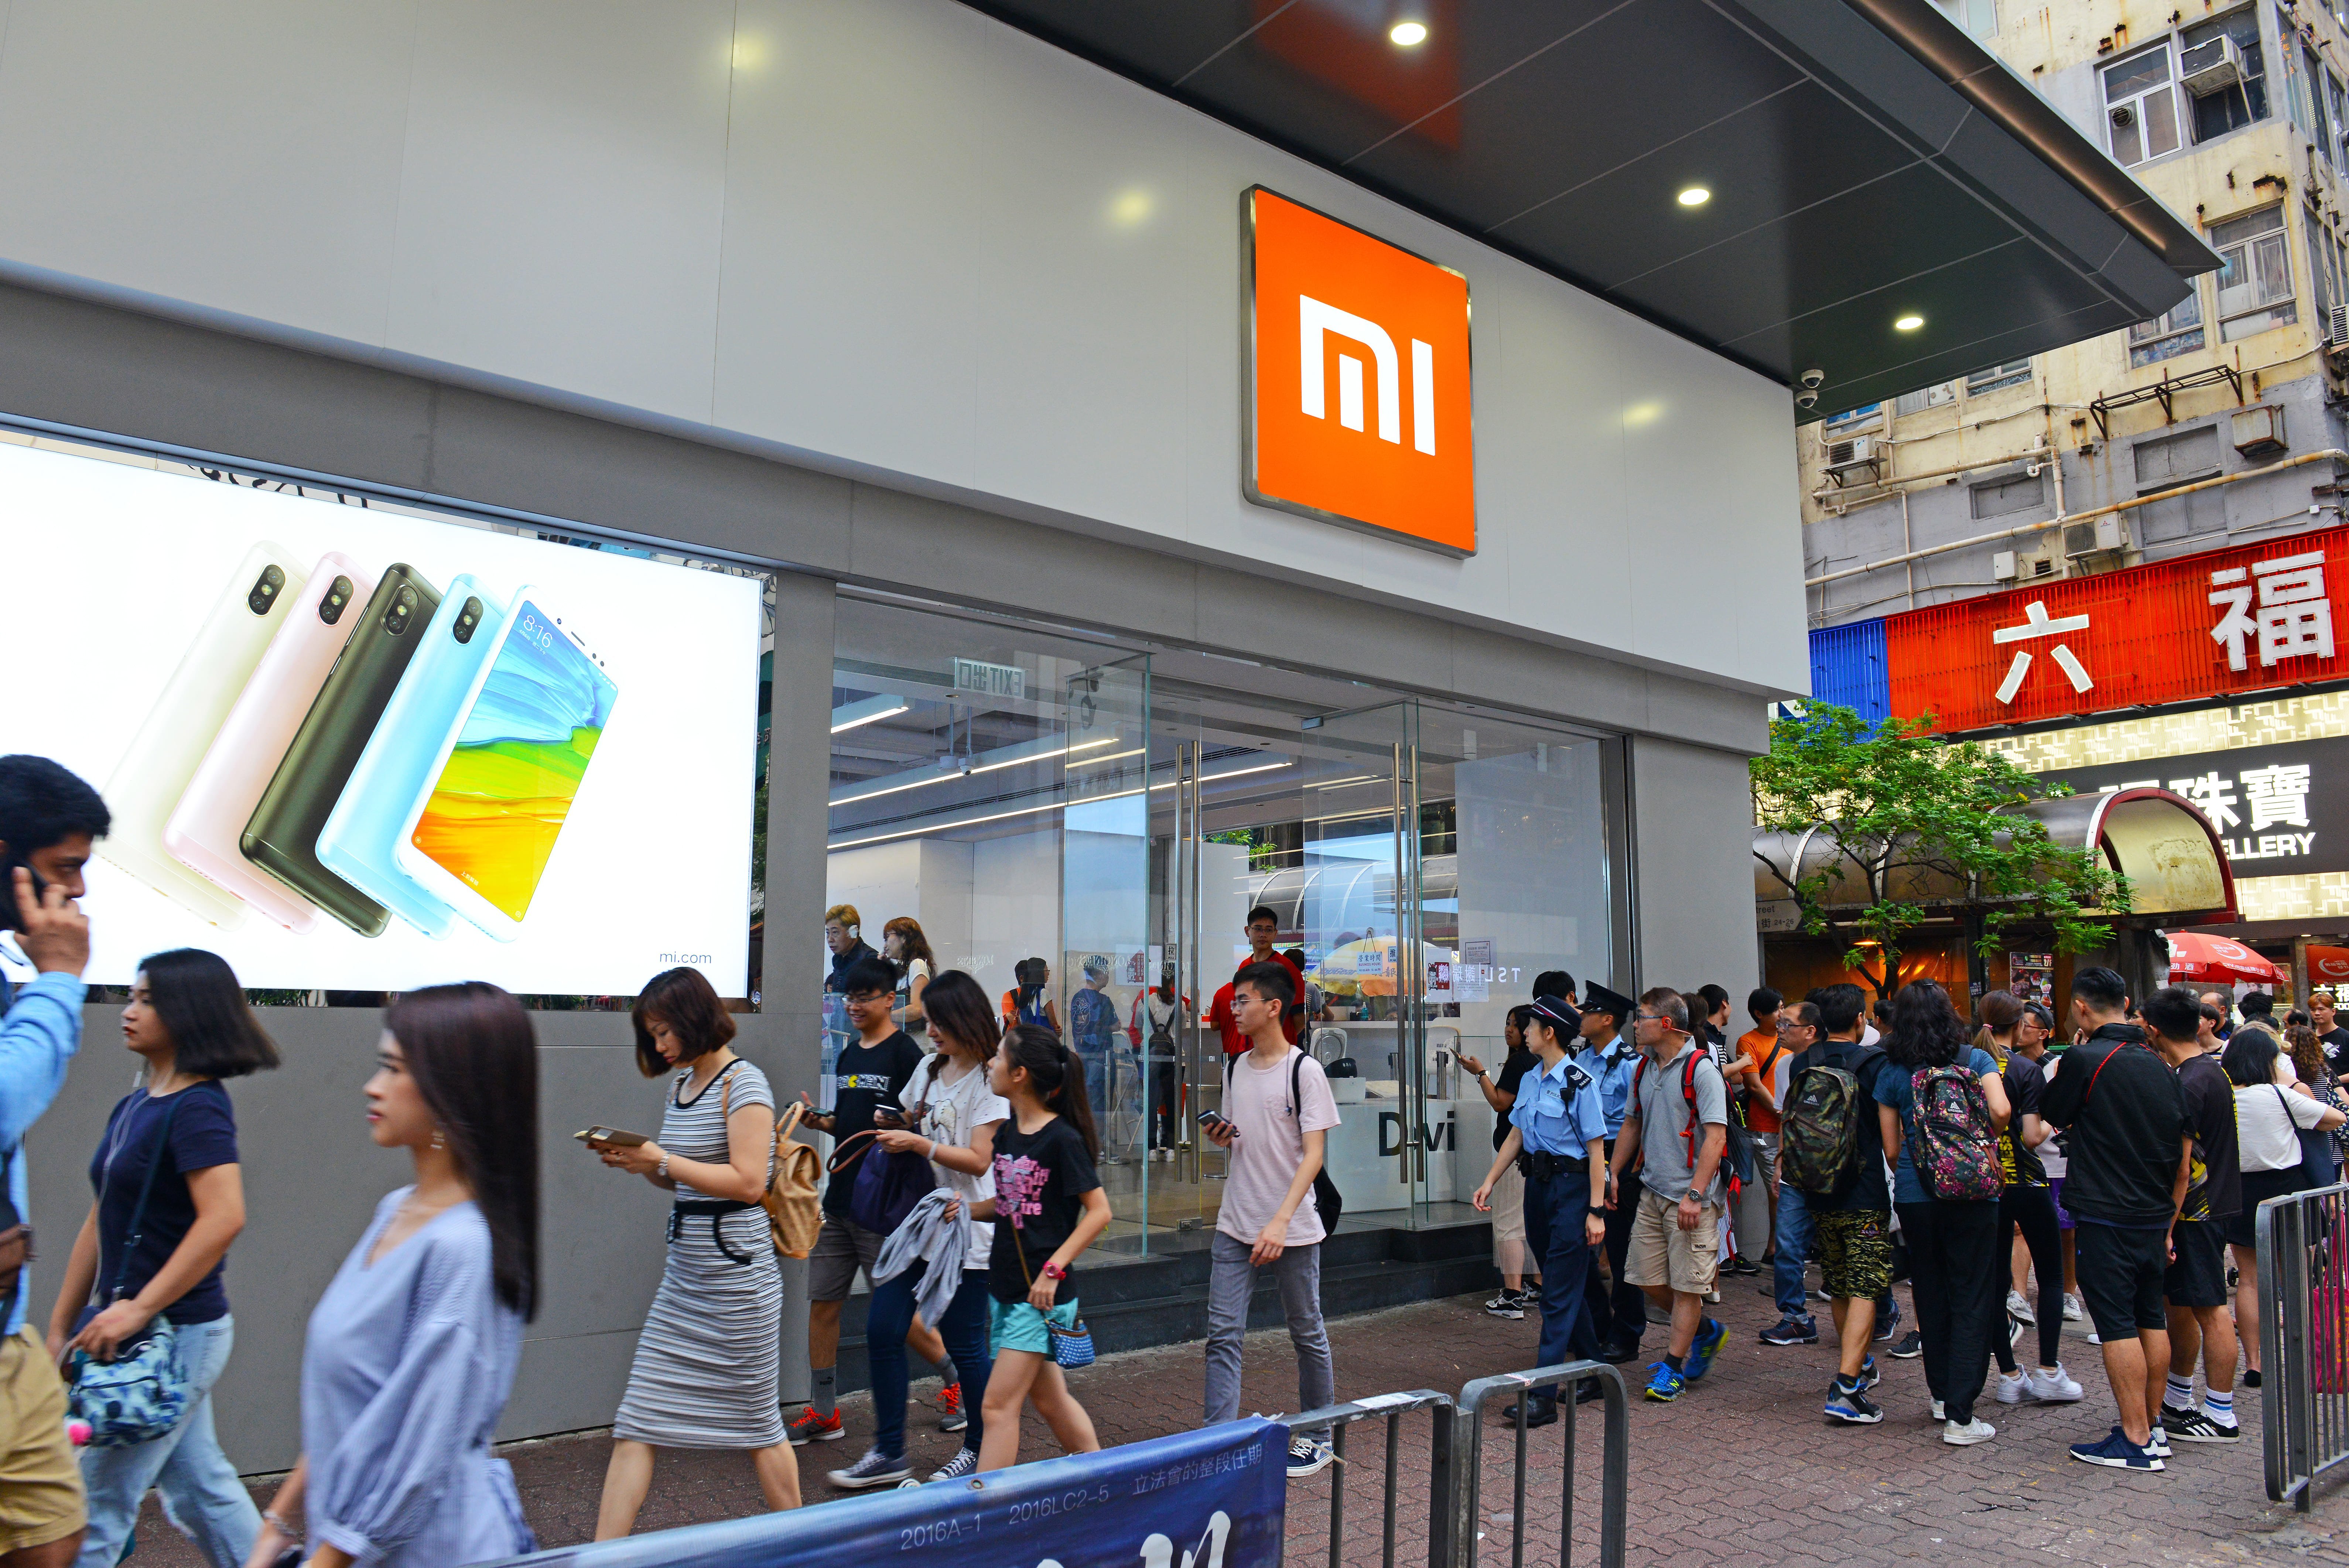 Xiaomi: The international expansion strategy of the 'Chinese Apple'